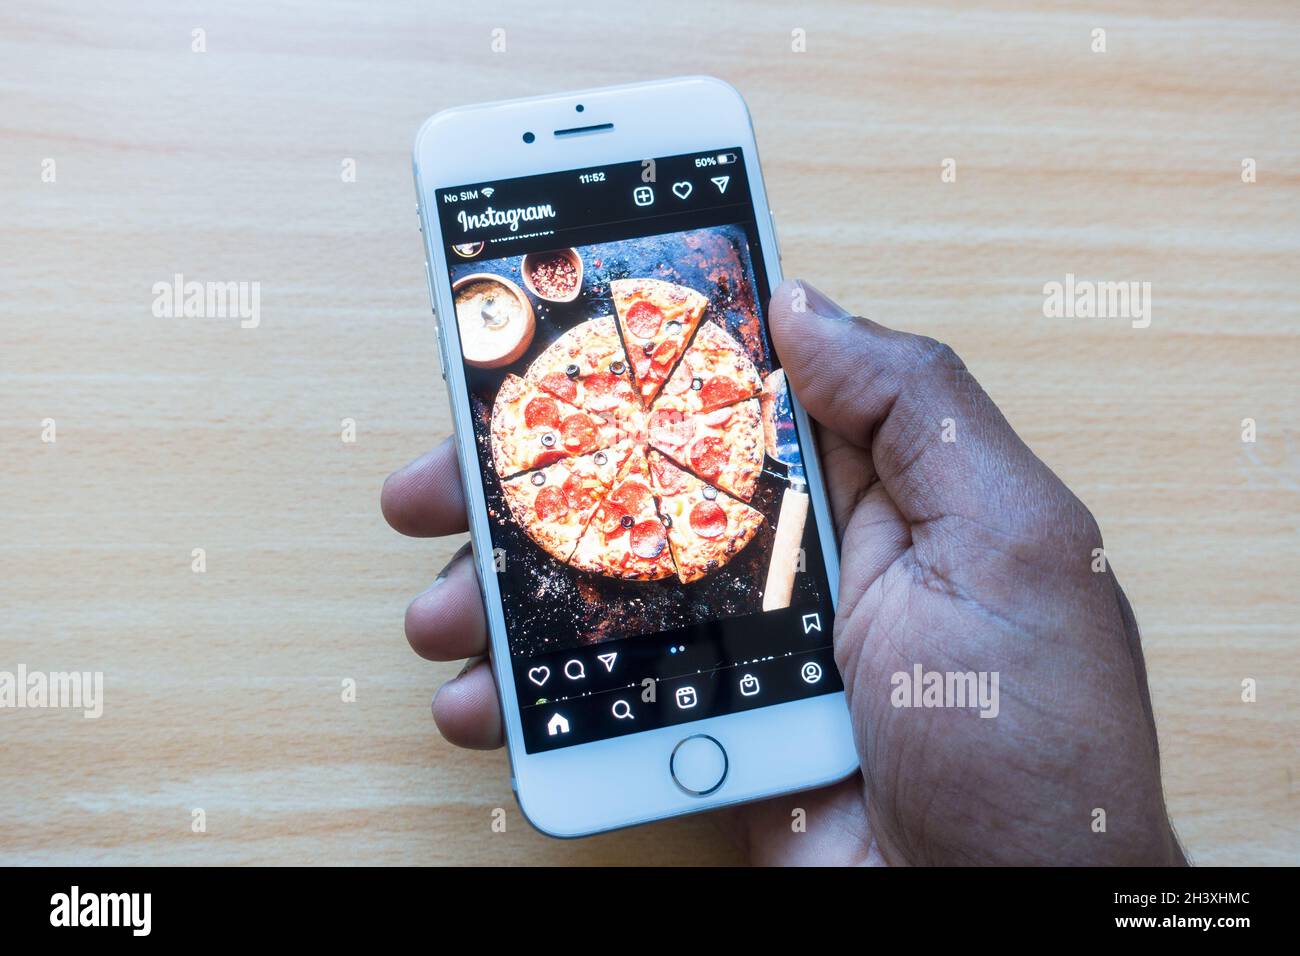 Adult male person looking into a Pizza photography on Instagram using apple mobile phone Stock Photo